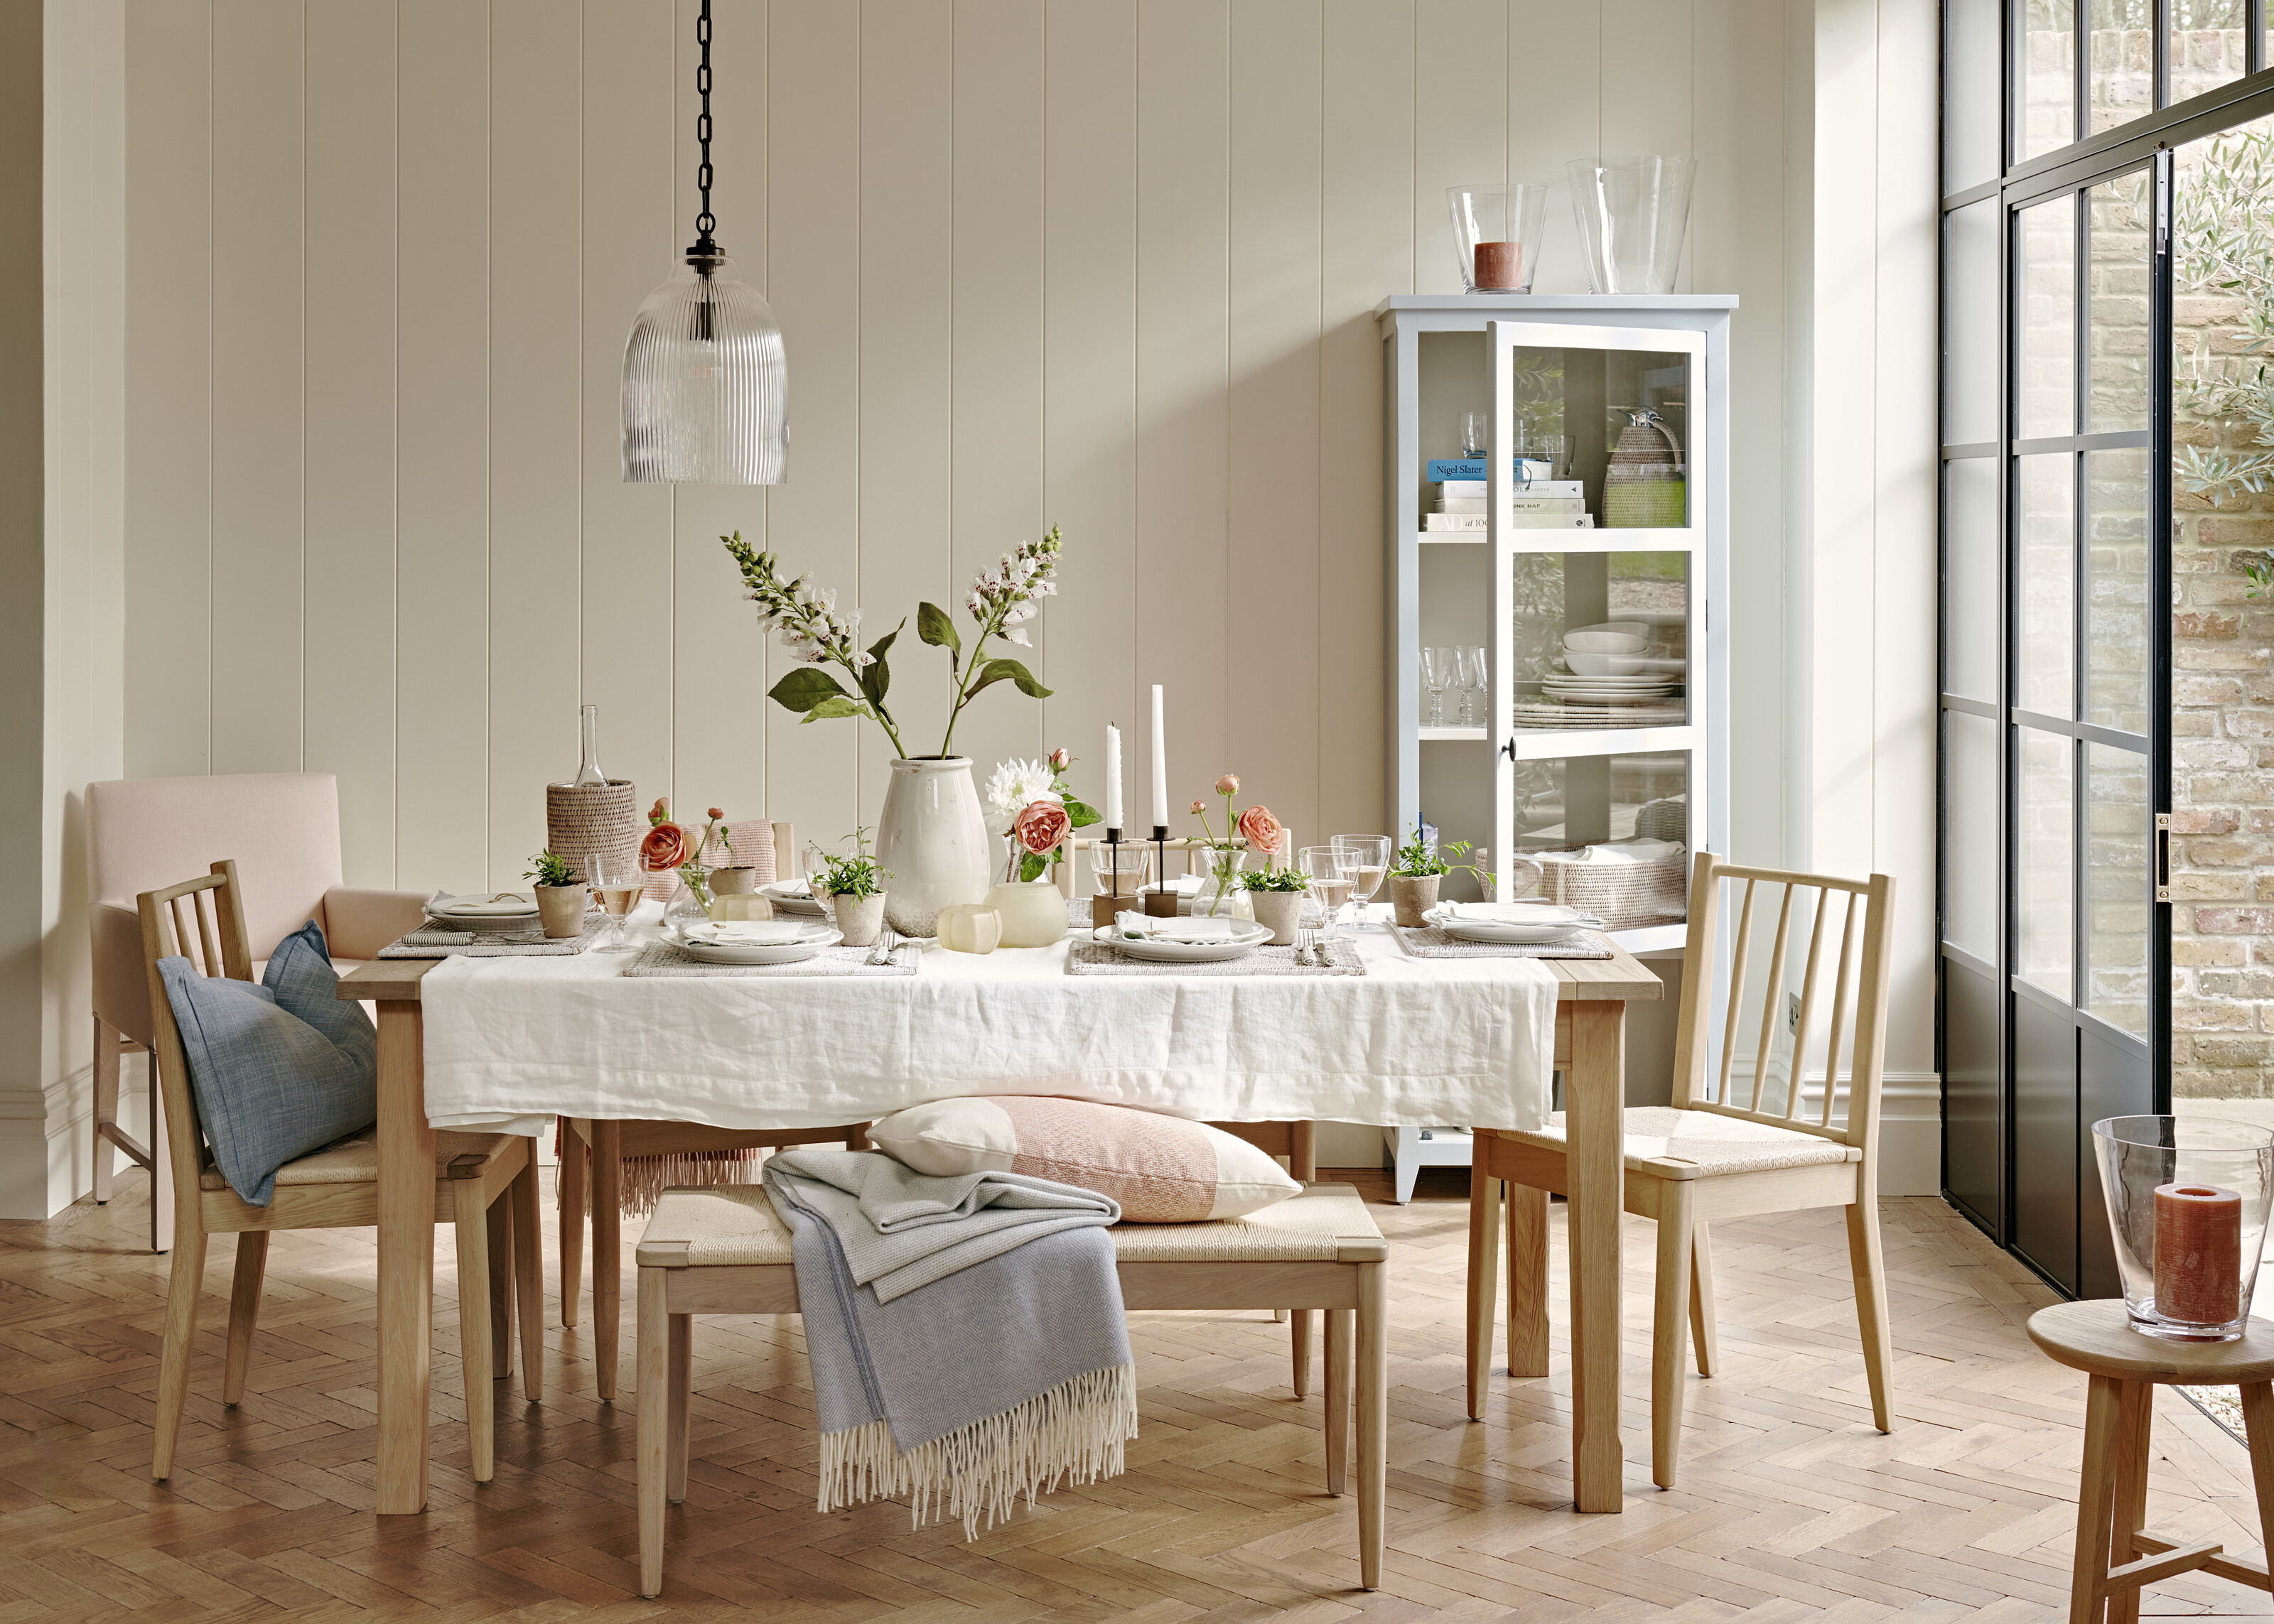 Wycombe dining chairs Moreton dining table